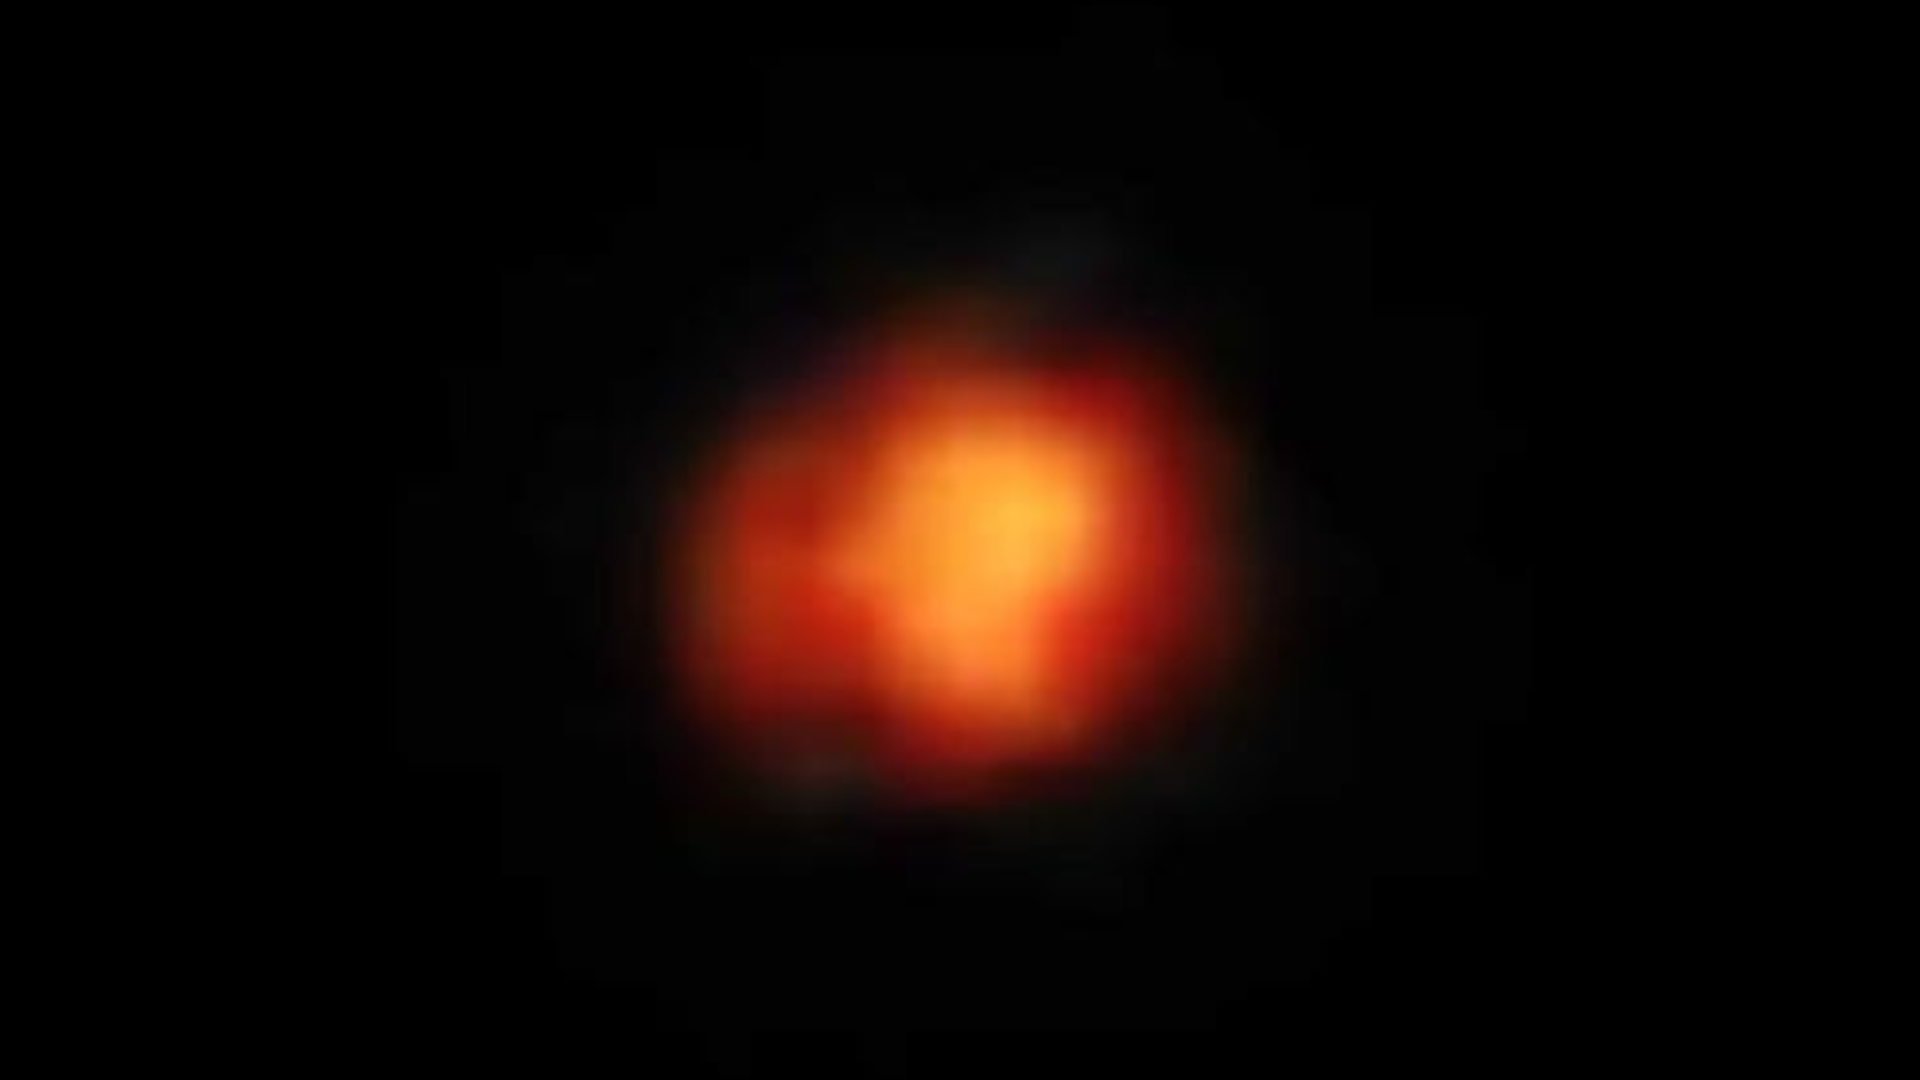 It might not loook like much but this glowing orange blob is one of the most important galaxies in recent astronomical history